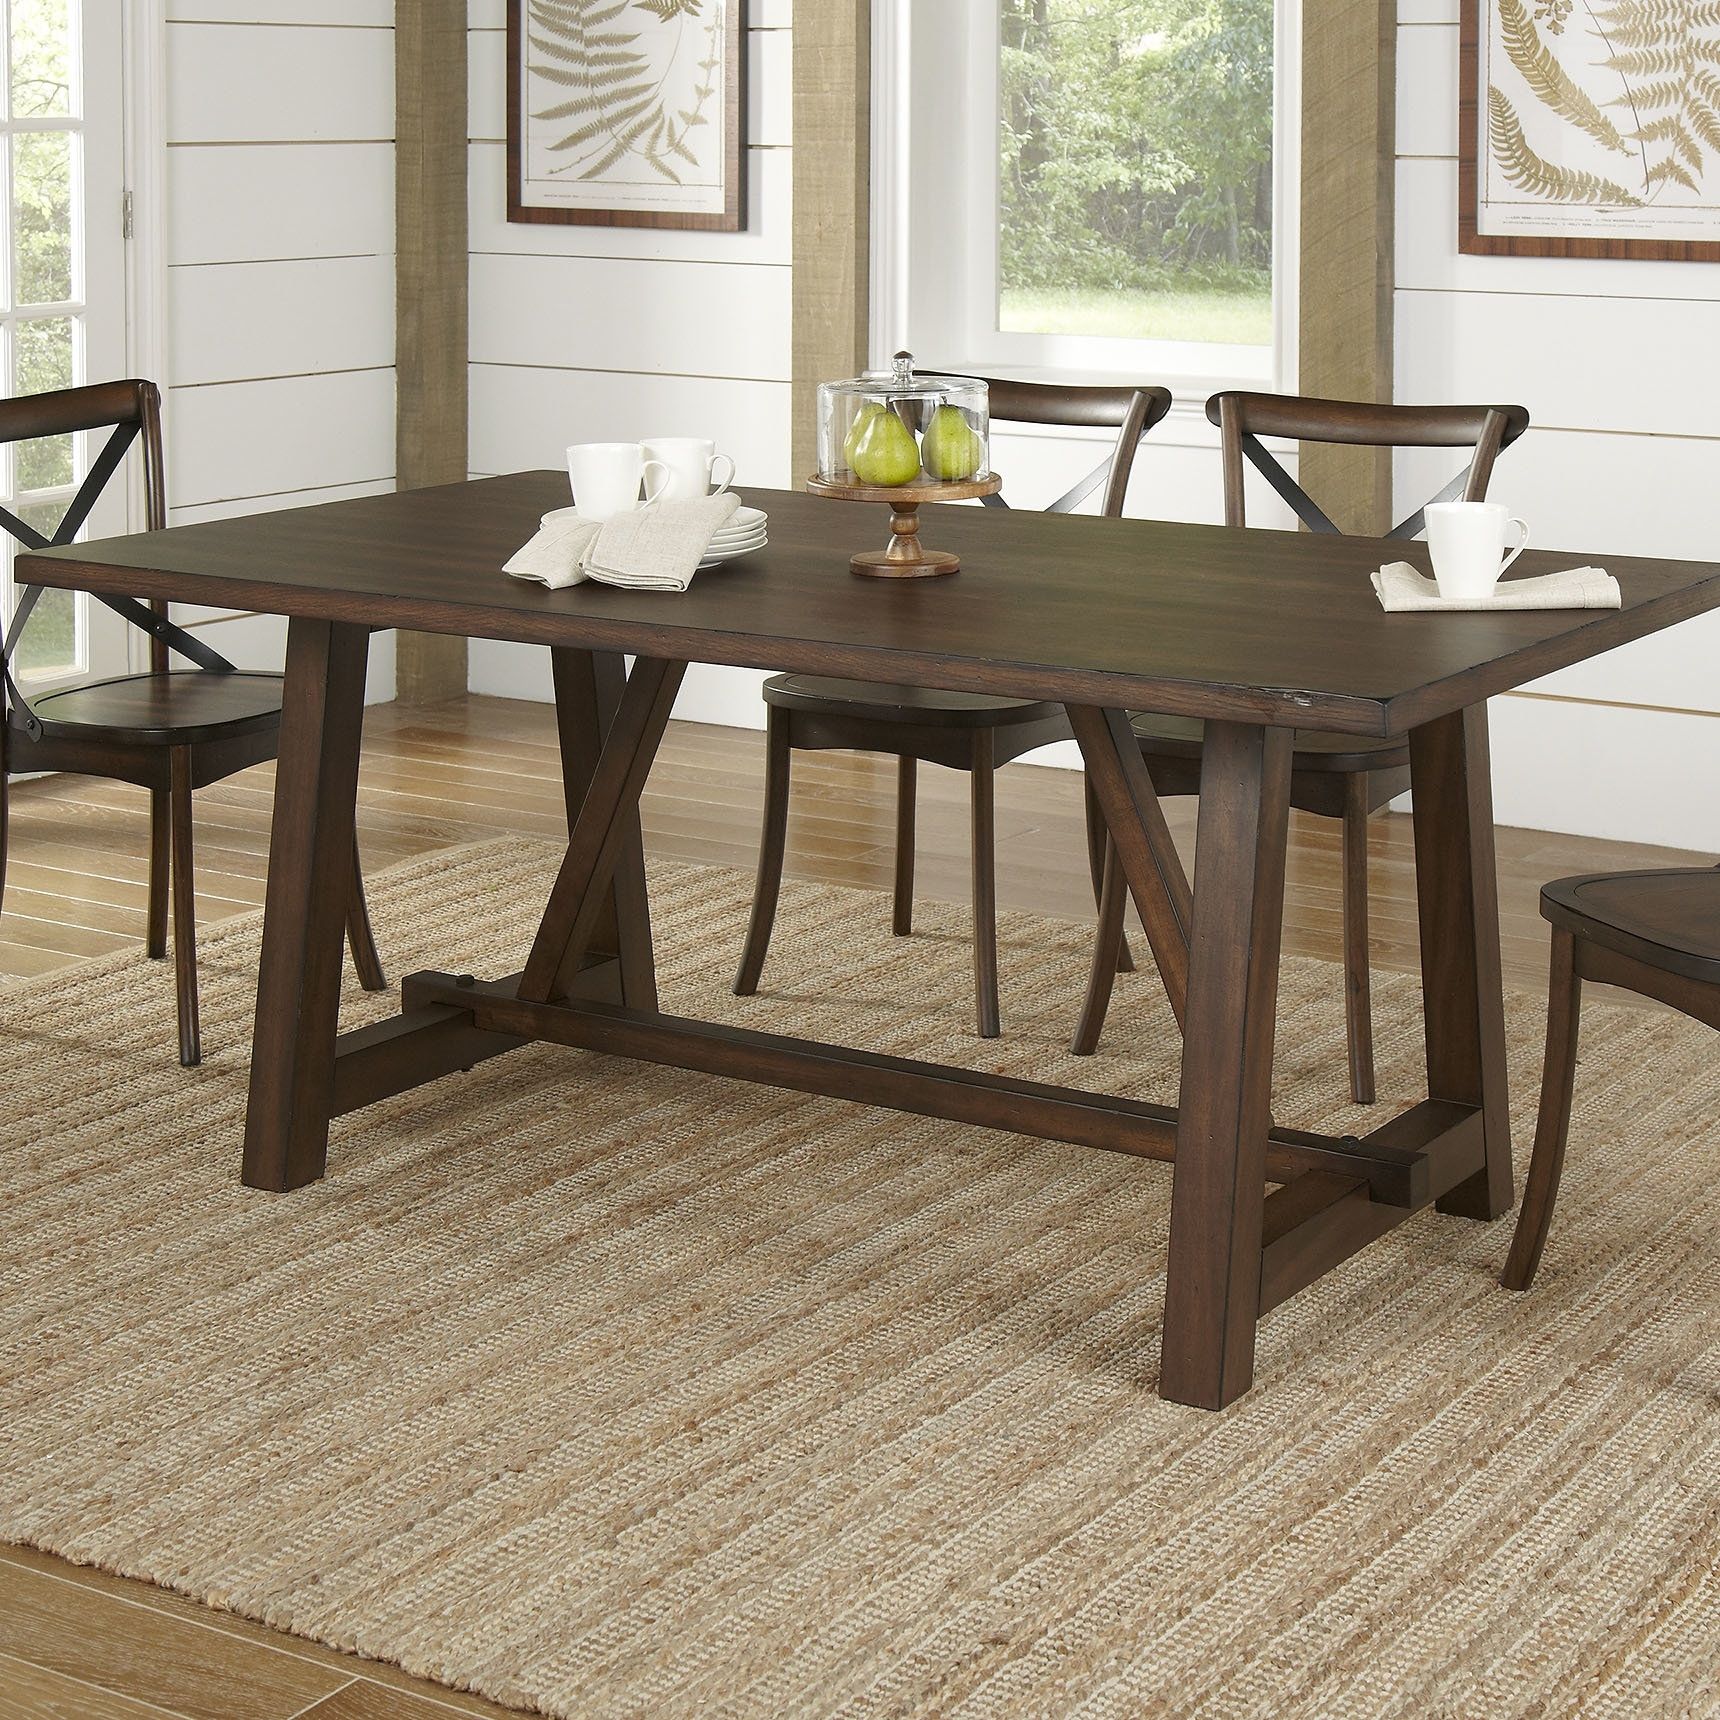 20 Ideas of Laurent 7 Piece Rectangle Dining Sets With Wood and Host ...